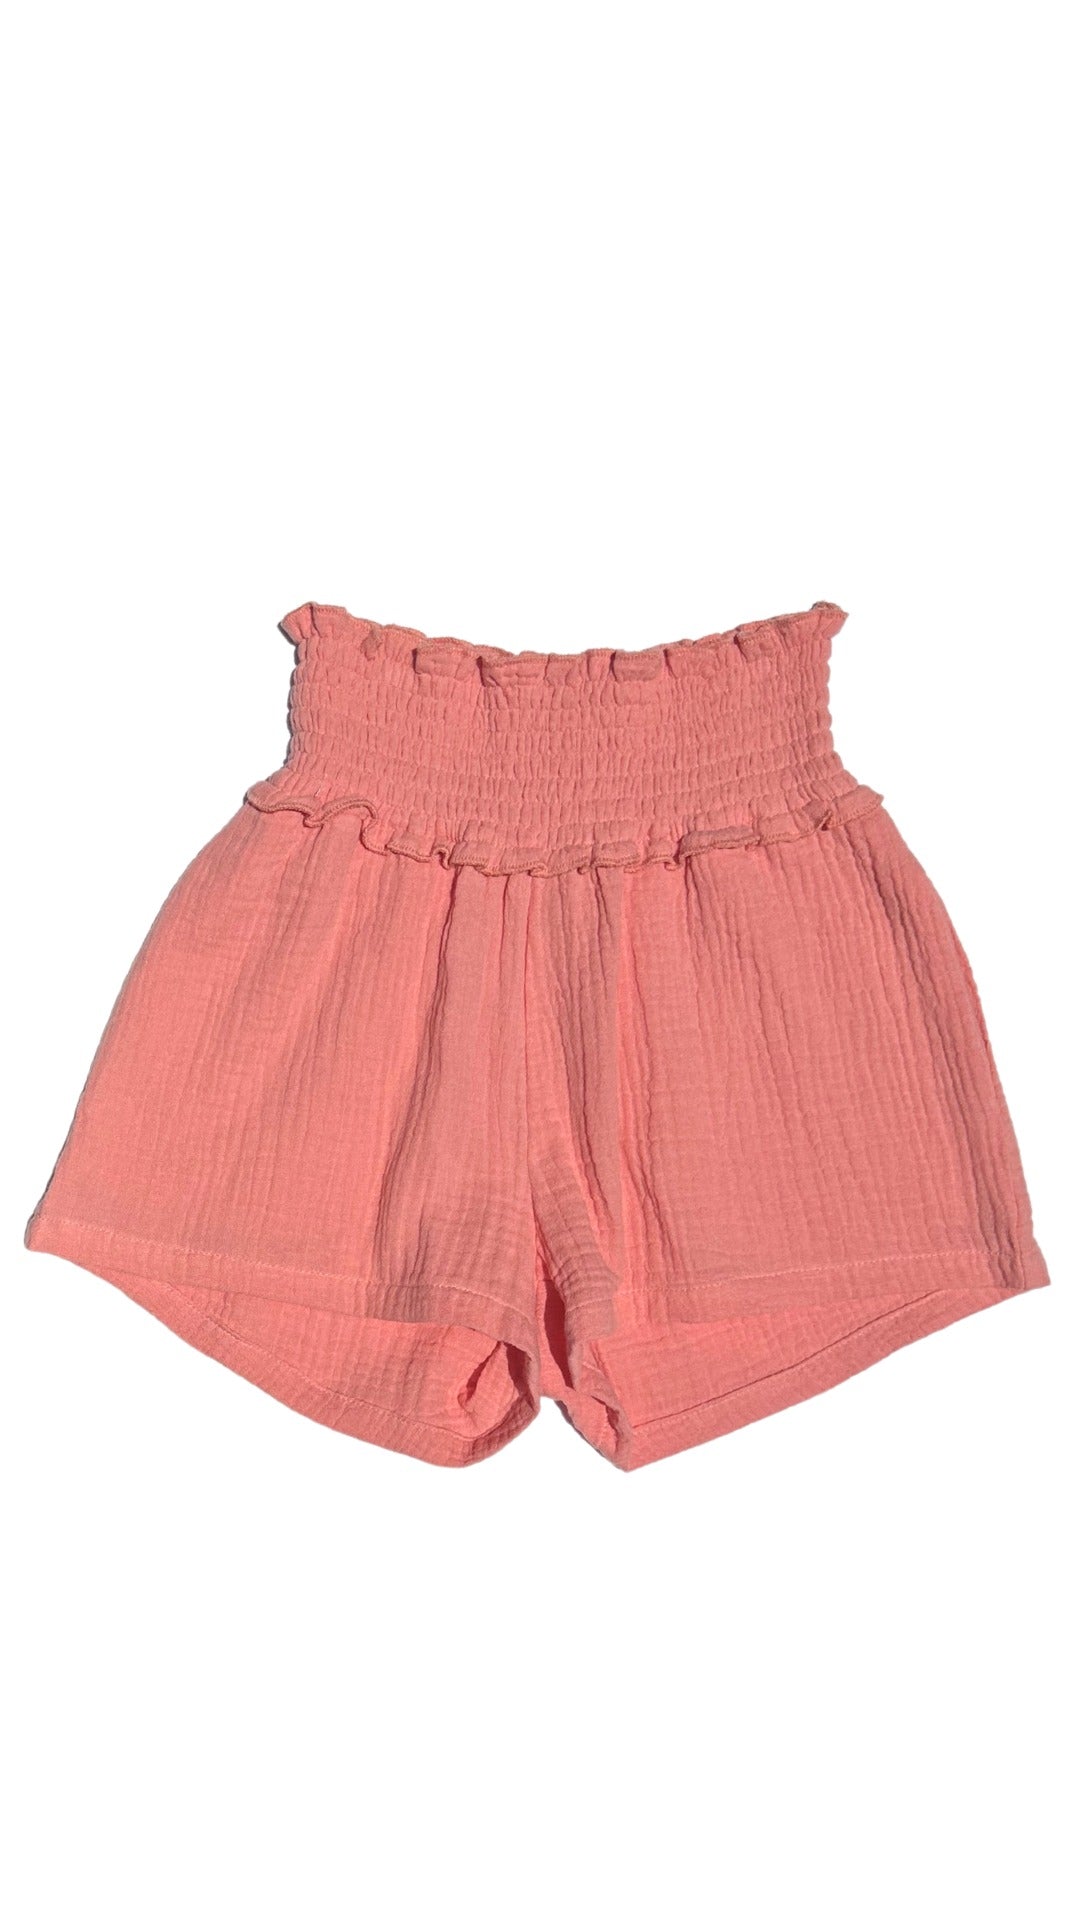 Pleat Collection Sadie Shorts 5102